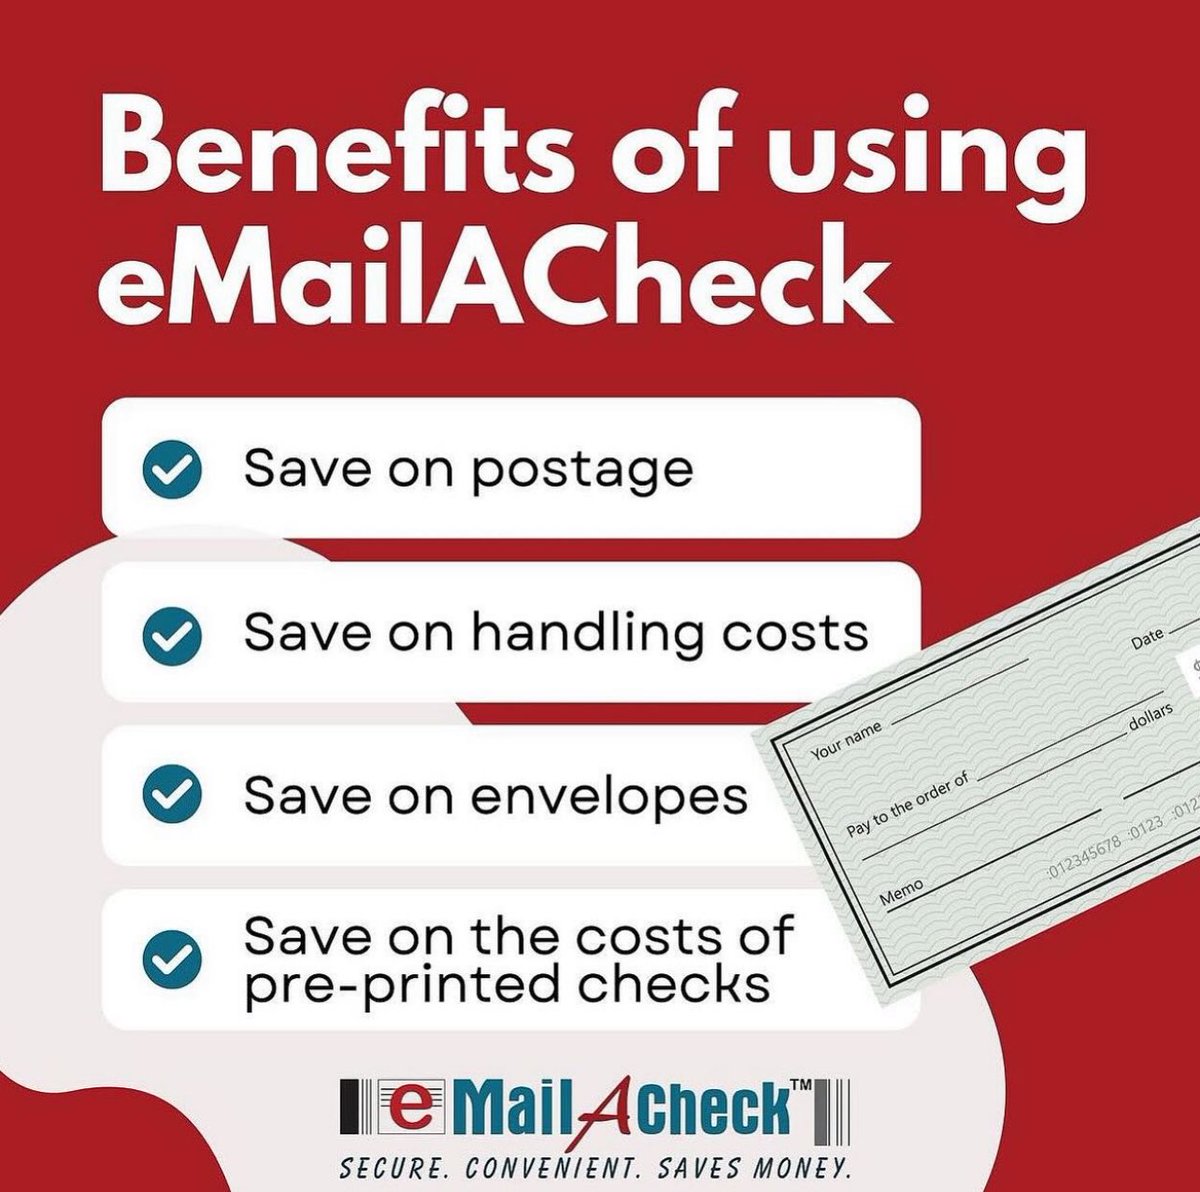 These are just some of the amazing benefits of using eMailACheck!

Visit our website to learn more and get started: emailacheck.com 

#emailacheck #onlinechecks #onlinepayments #makepaymentsonline